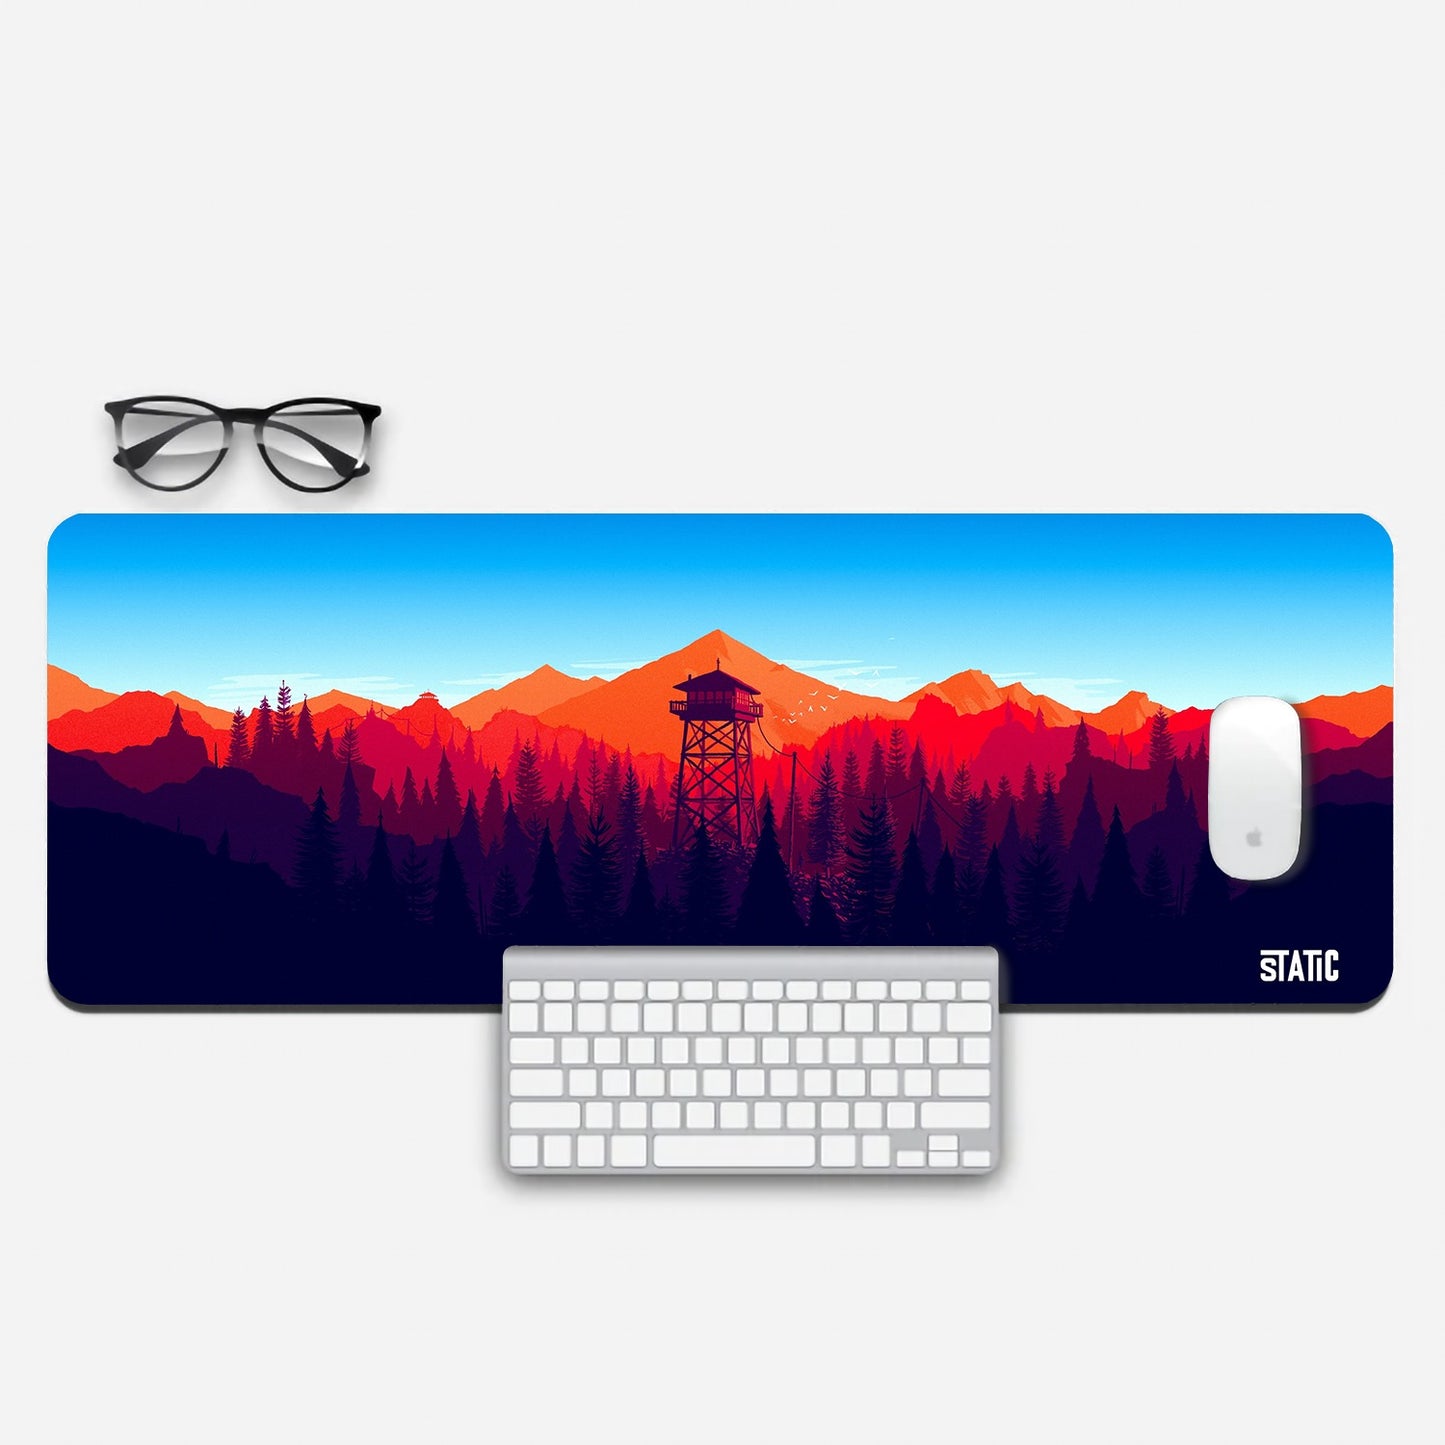 Enhance your gaming setup with our Extended Gaming Mousepad, showcasing a captivating digital landscape. Dive into the seamless transition from a serene dark forest to a fiery red mountain range under a pristine blue sky, all centered around a watchtower. With a size of 800x300mm, it offers ample room for precision and stability thanks to its skid-proof design. Elevate your gaming experience today!